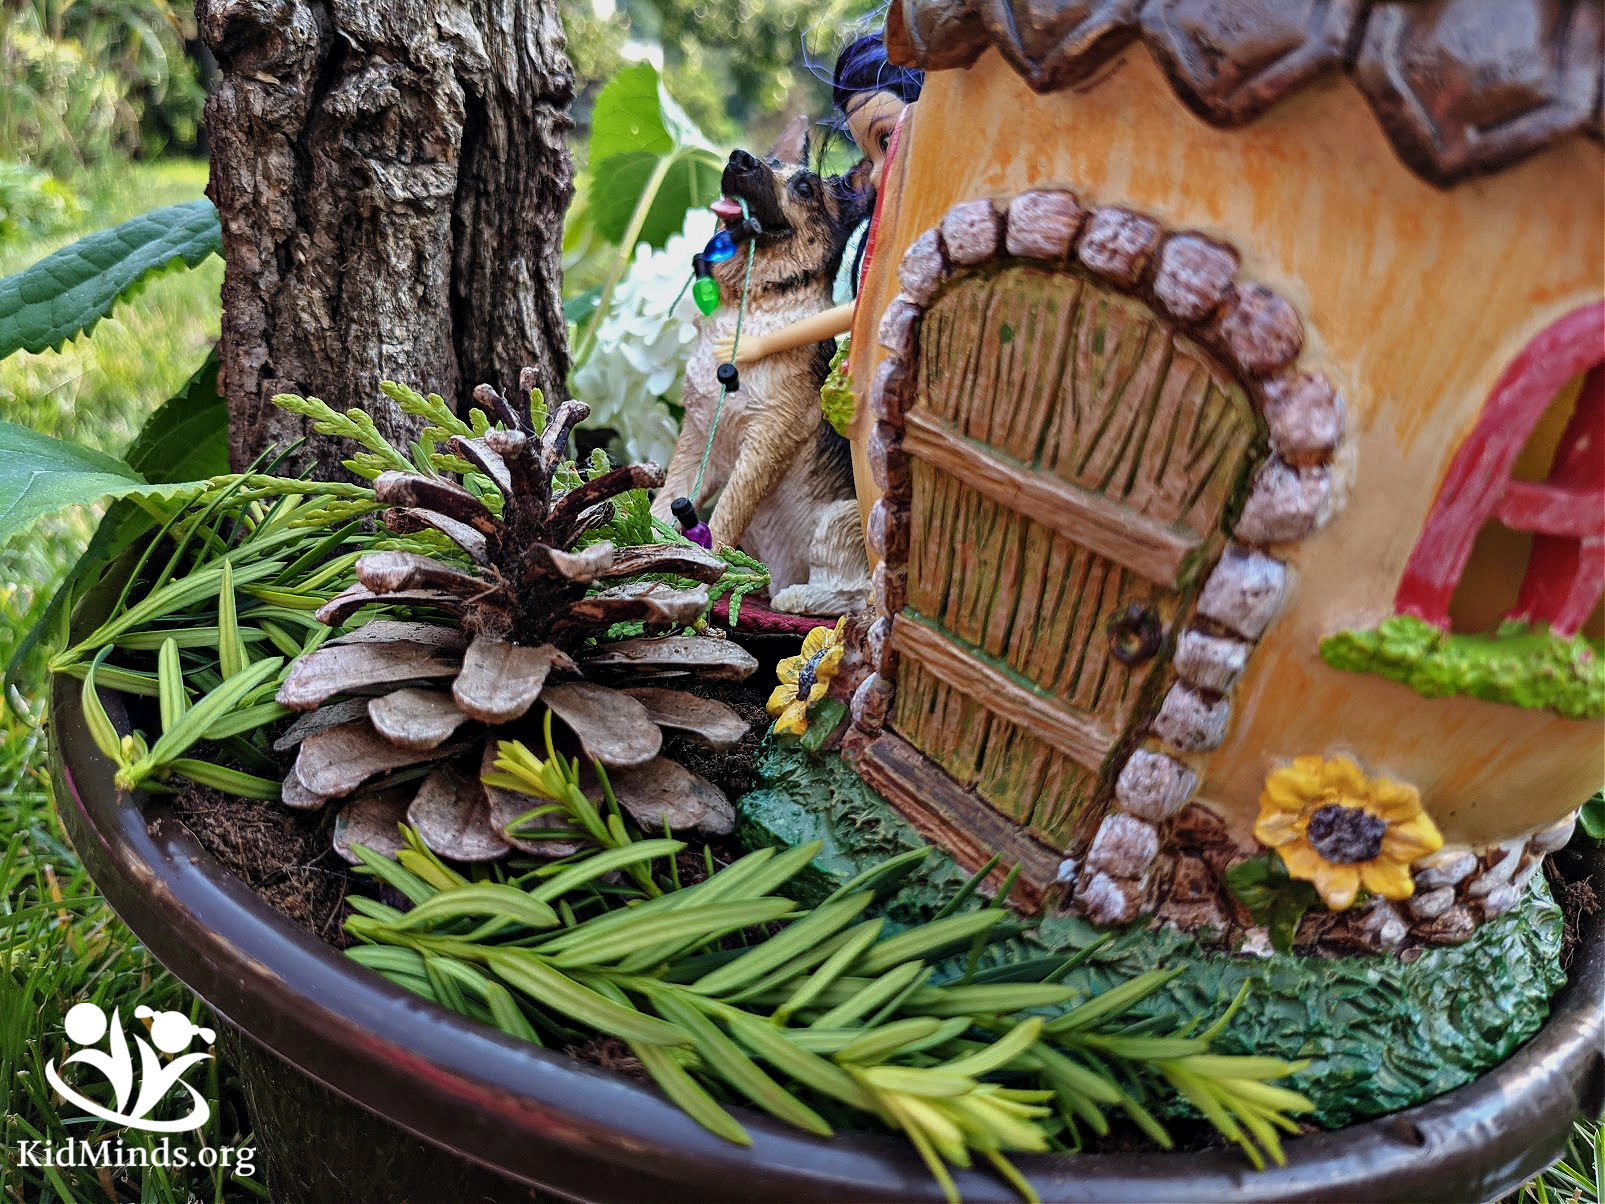 Putting together a fairy garden is not just fun! It incorporates science, technology, engineering, and math (STEM) learning. #kidsactivities #fairygarden #STEMlearning #playandlearn